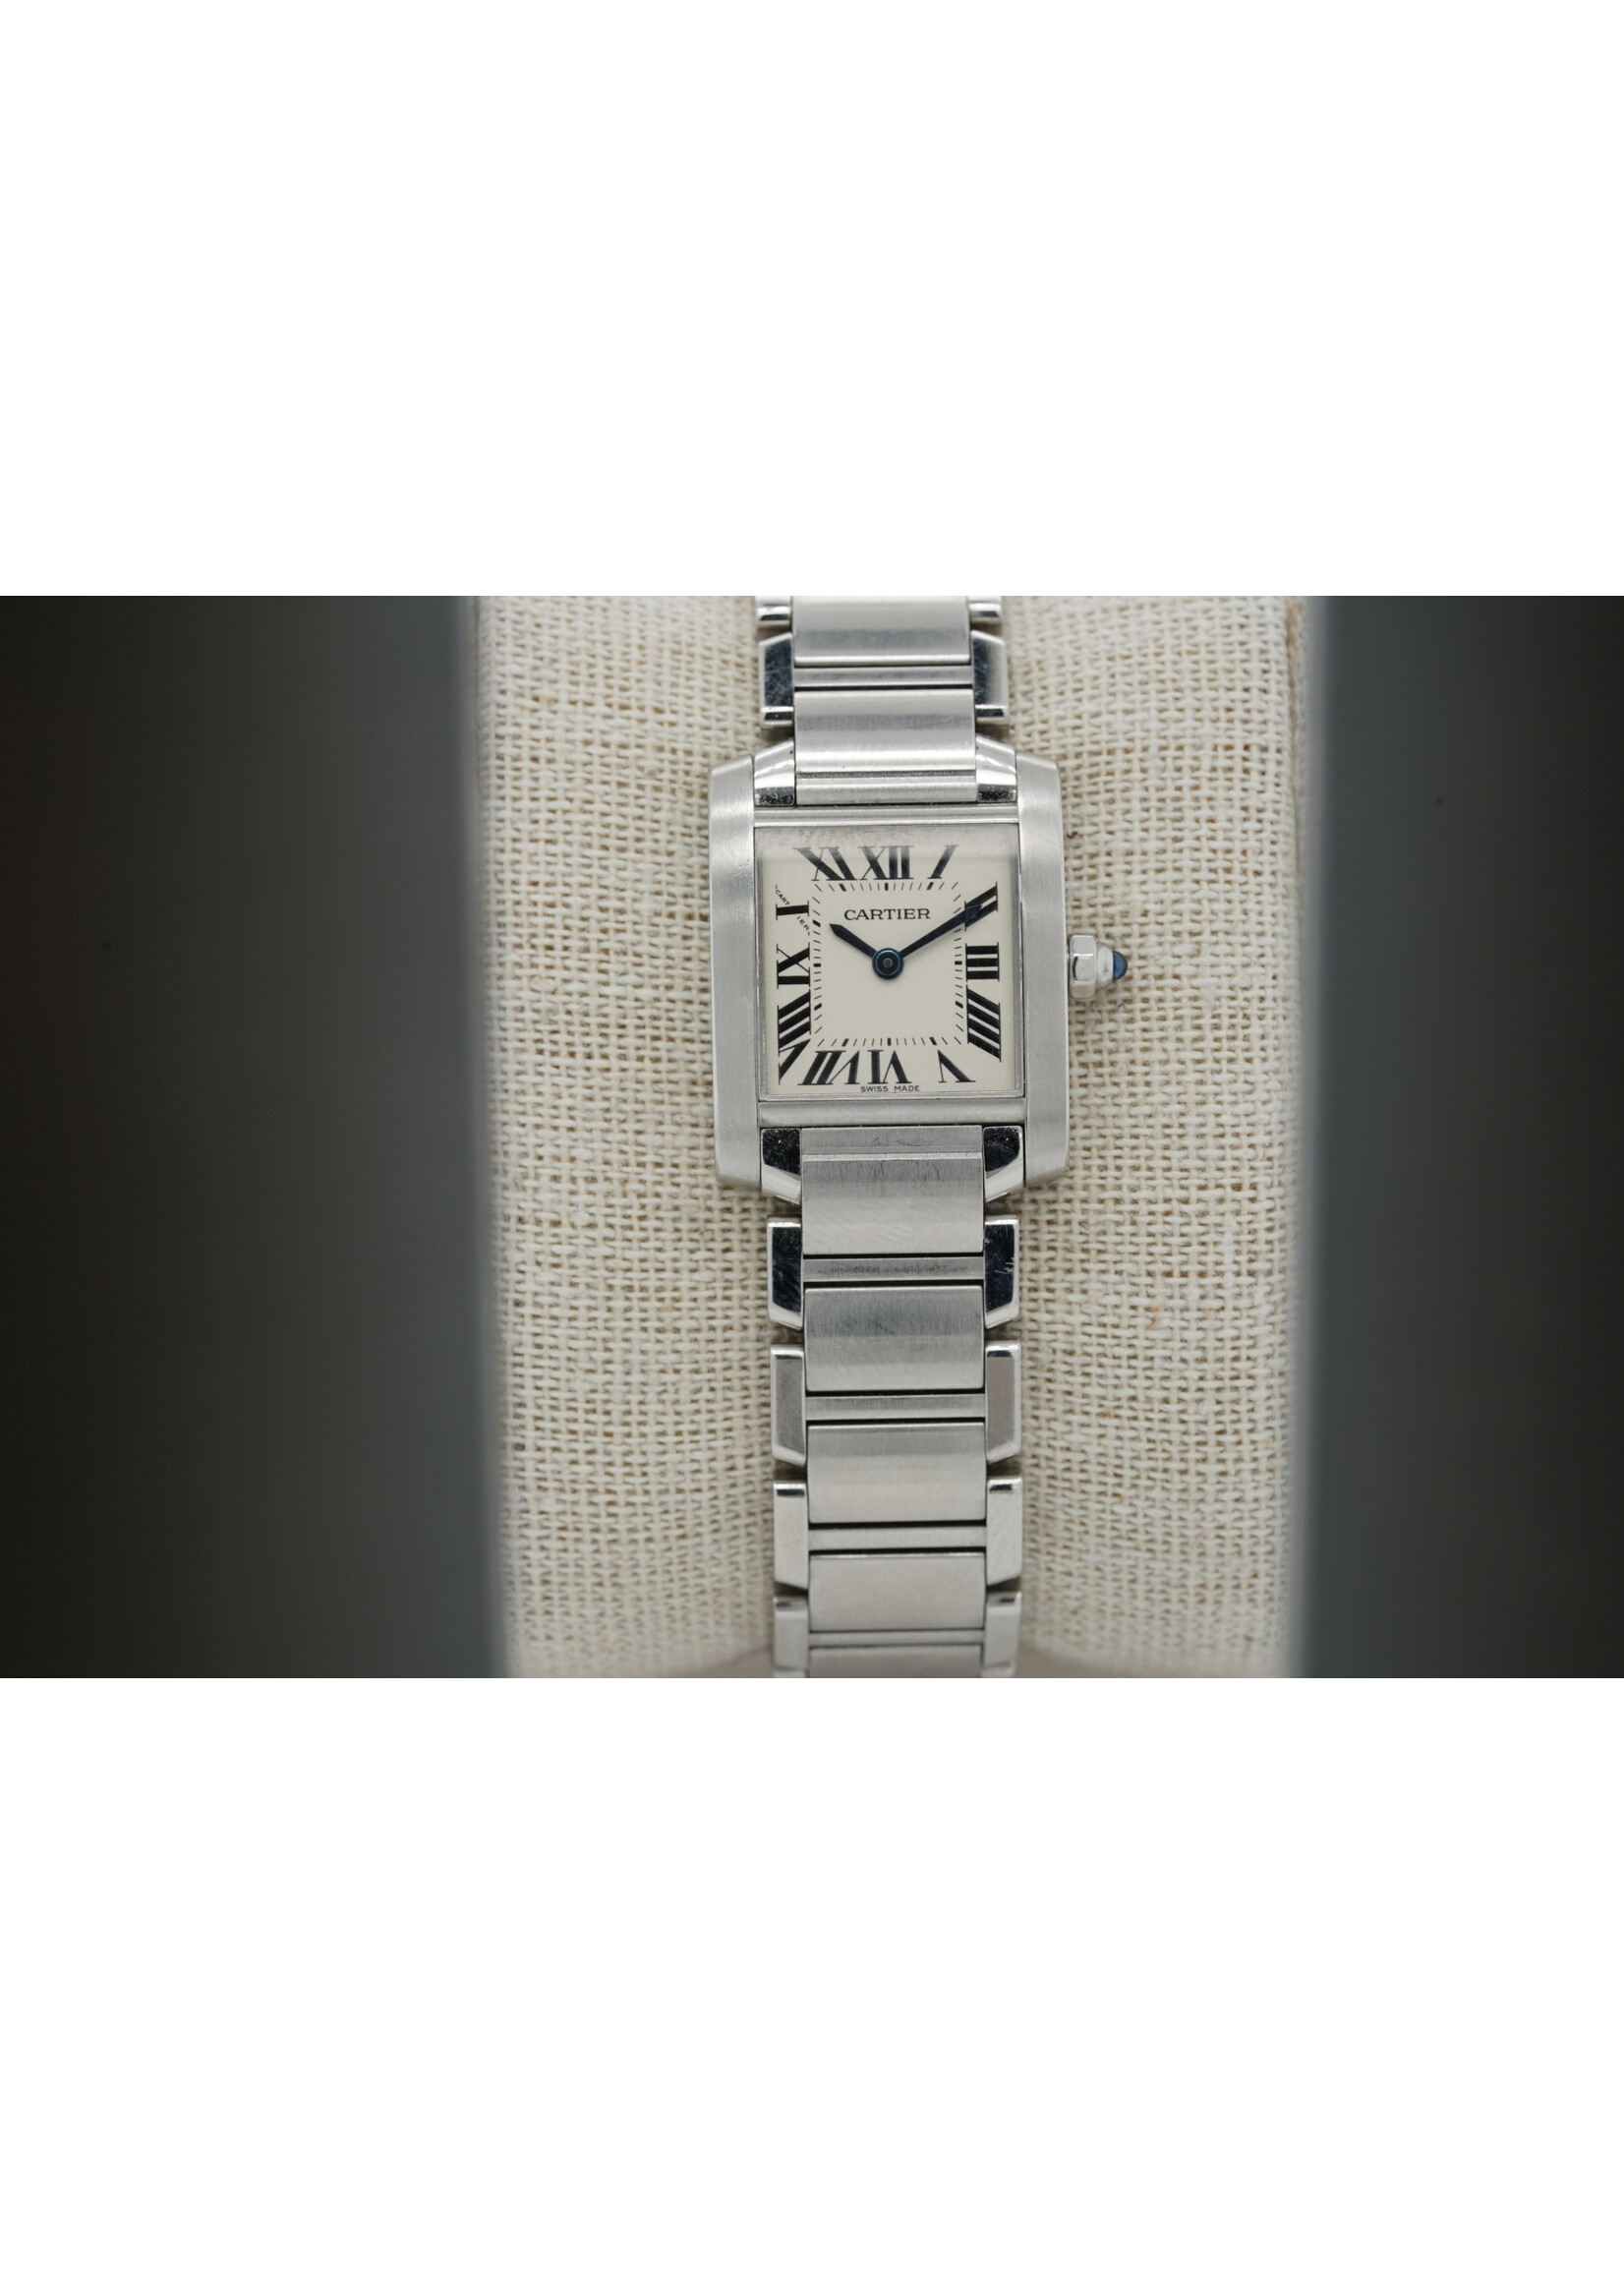 Cartier Tank Francaise Small Model 25mm x 20mm Stainless